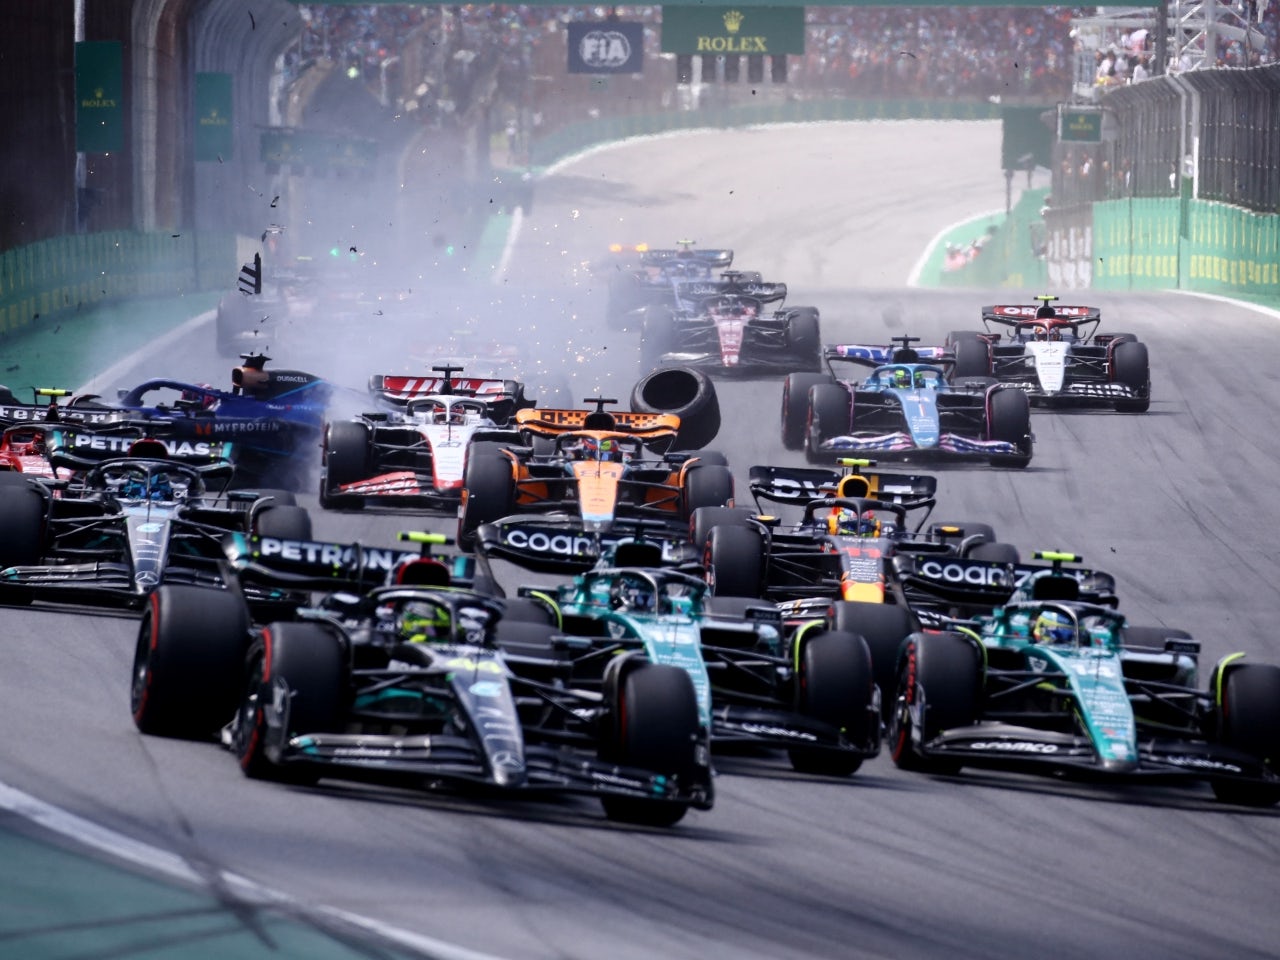 Turkey on the brink of securing new F1 race deal